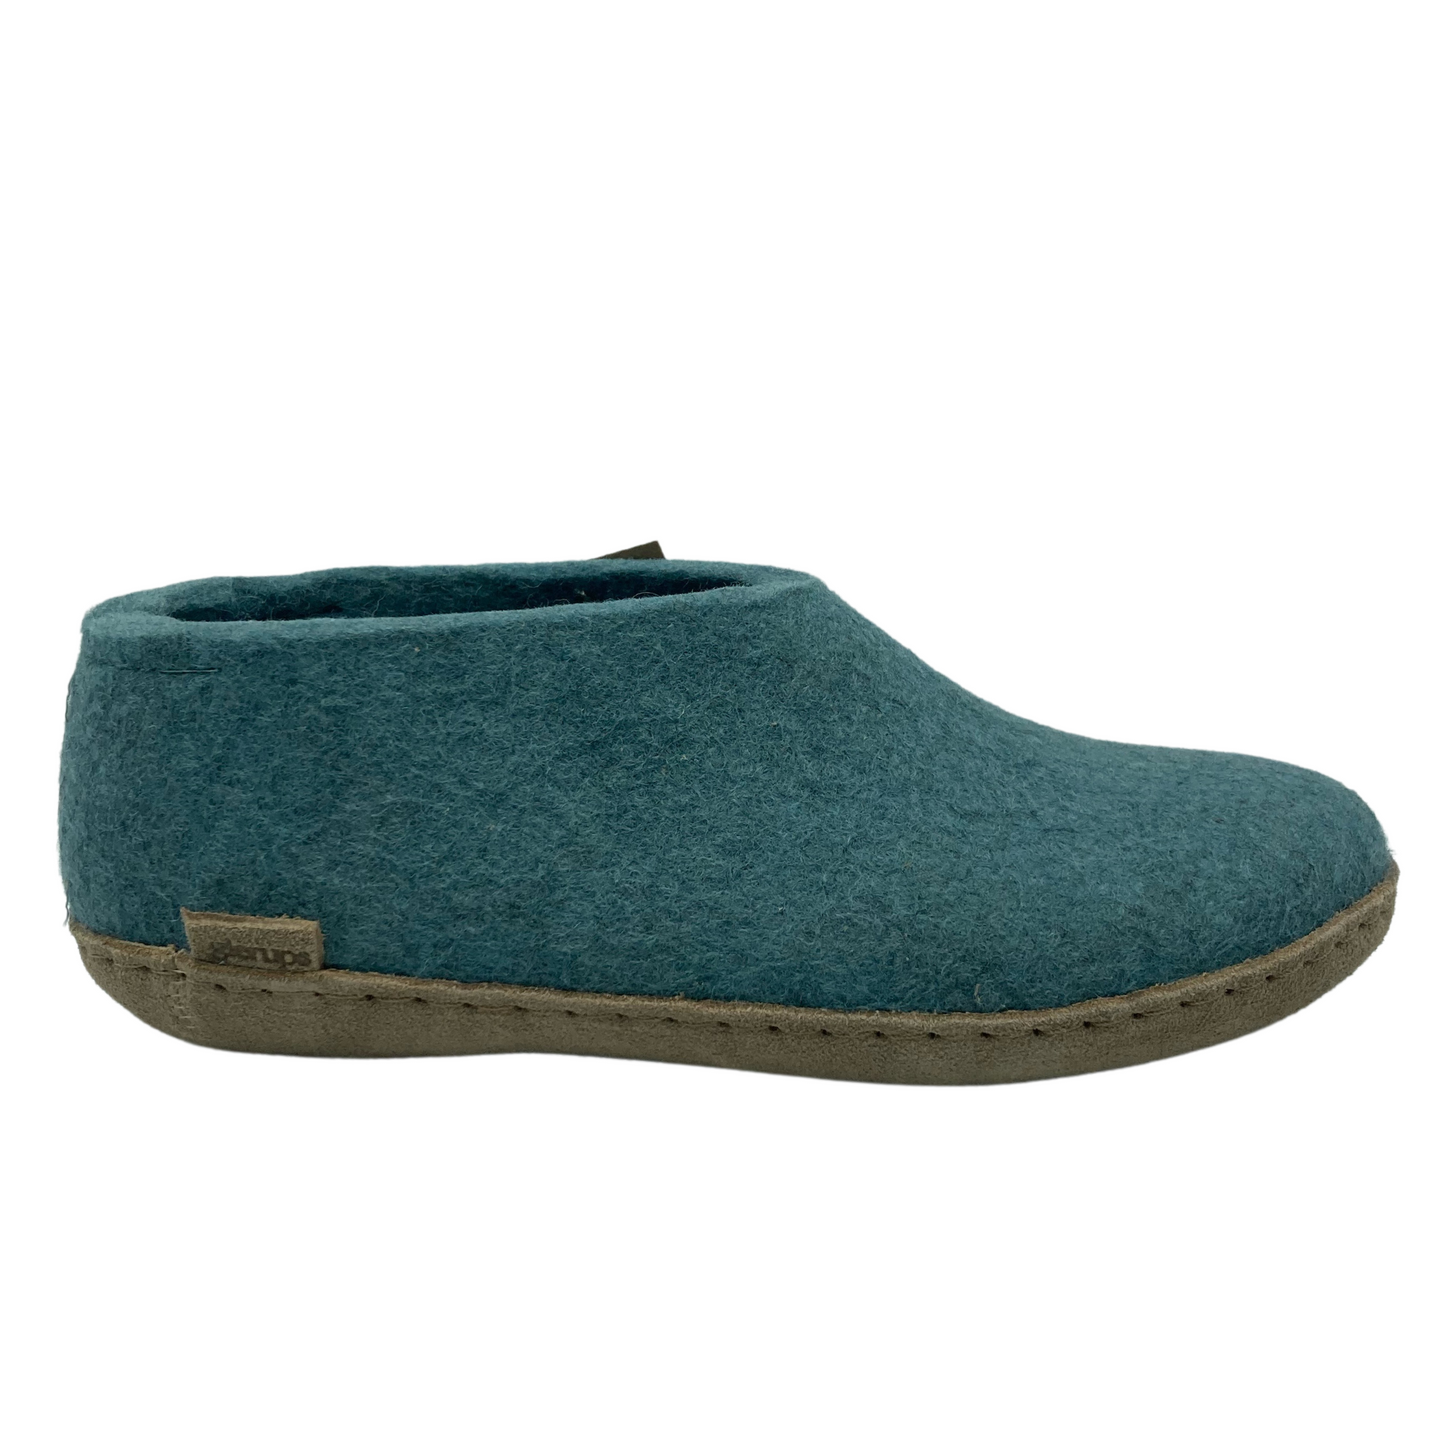 Right facing view of felted wool shoe with suede leather sole